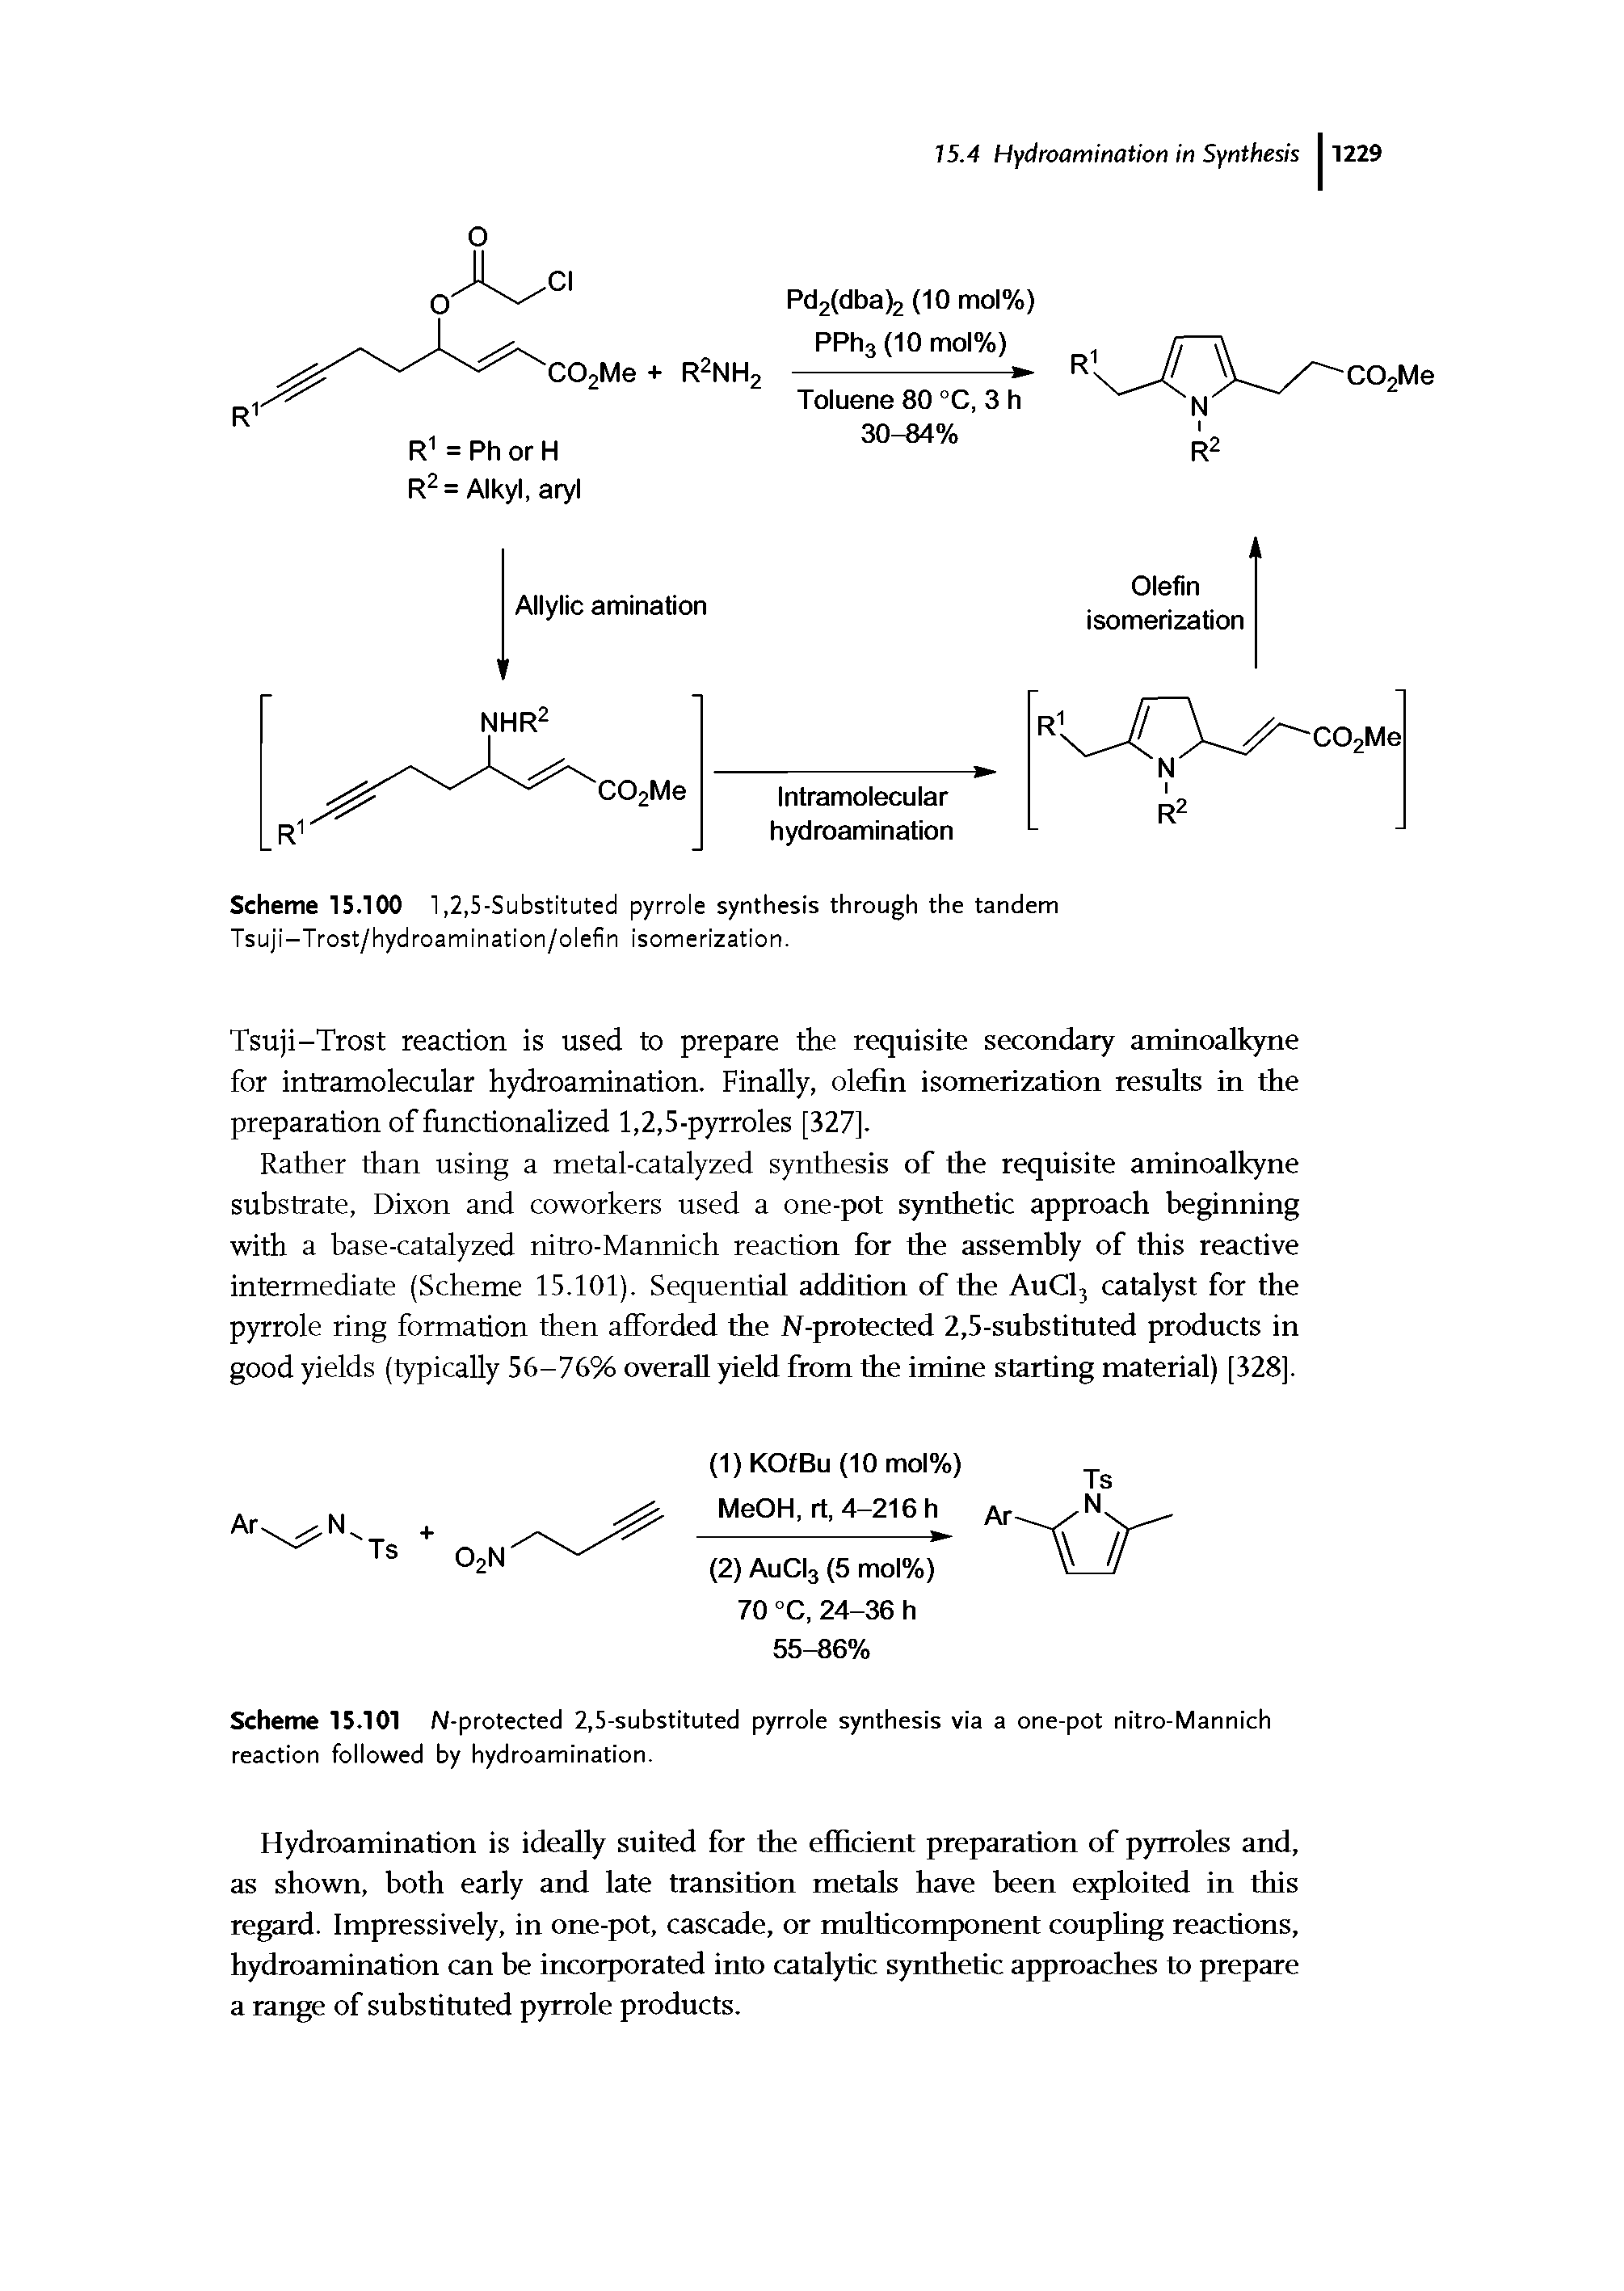 Scheme 15.101 A/.protected 2,5-substituted pyrrole synthesis via a one-pot nitro-Mannich reaction followed by hydroamination.